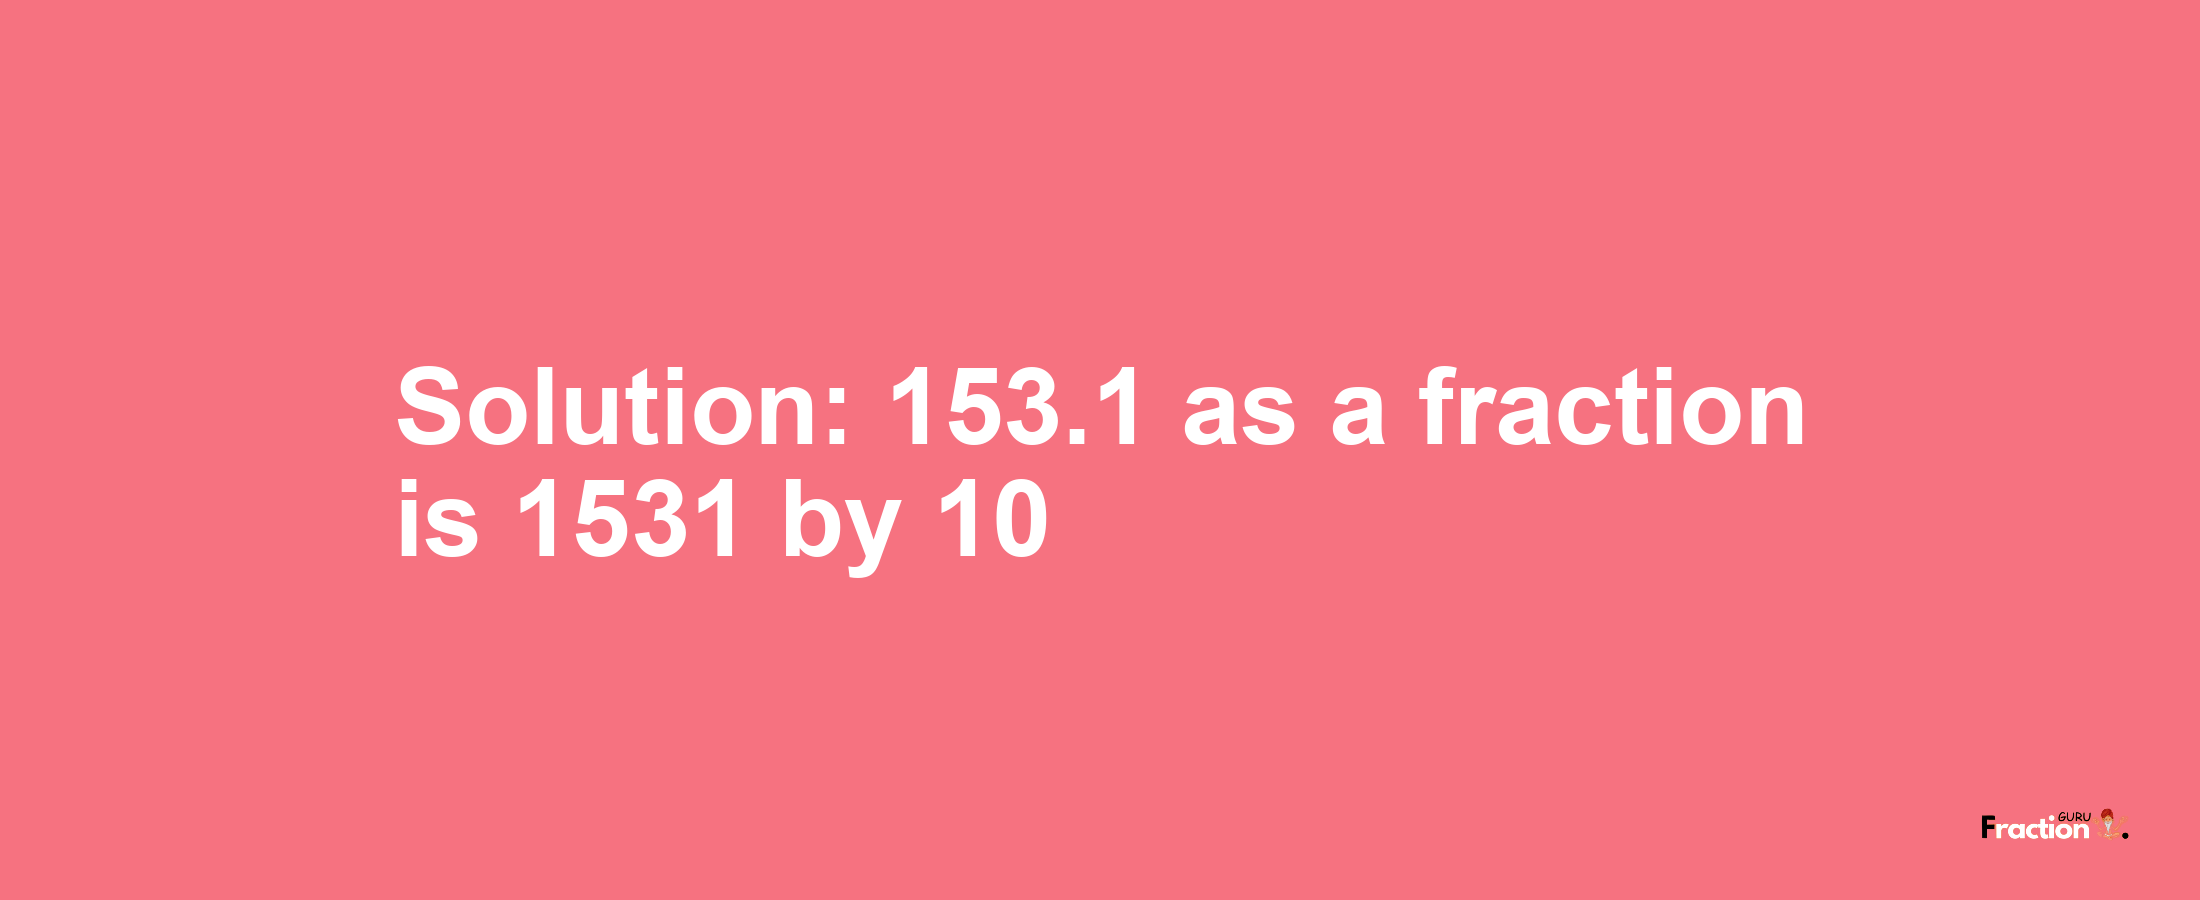 Solution:153.1 as a fraction is 1531/10